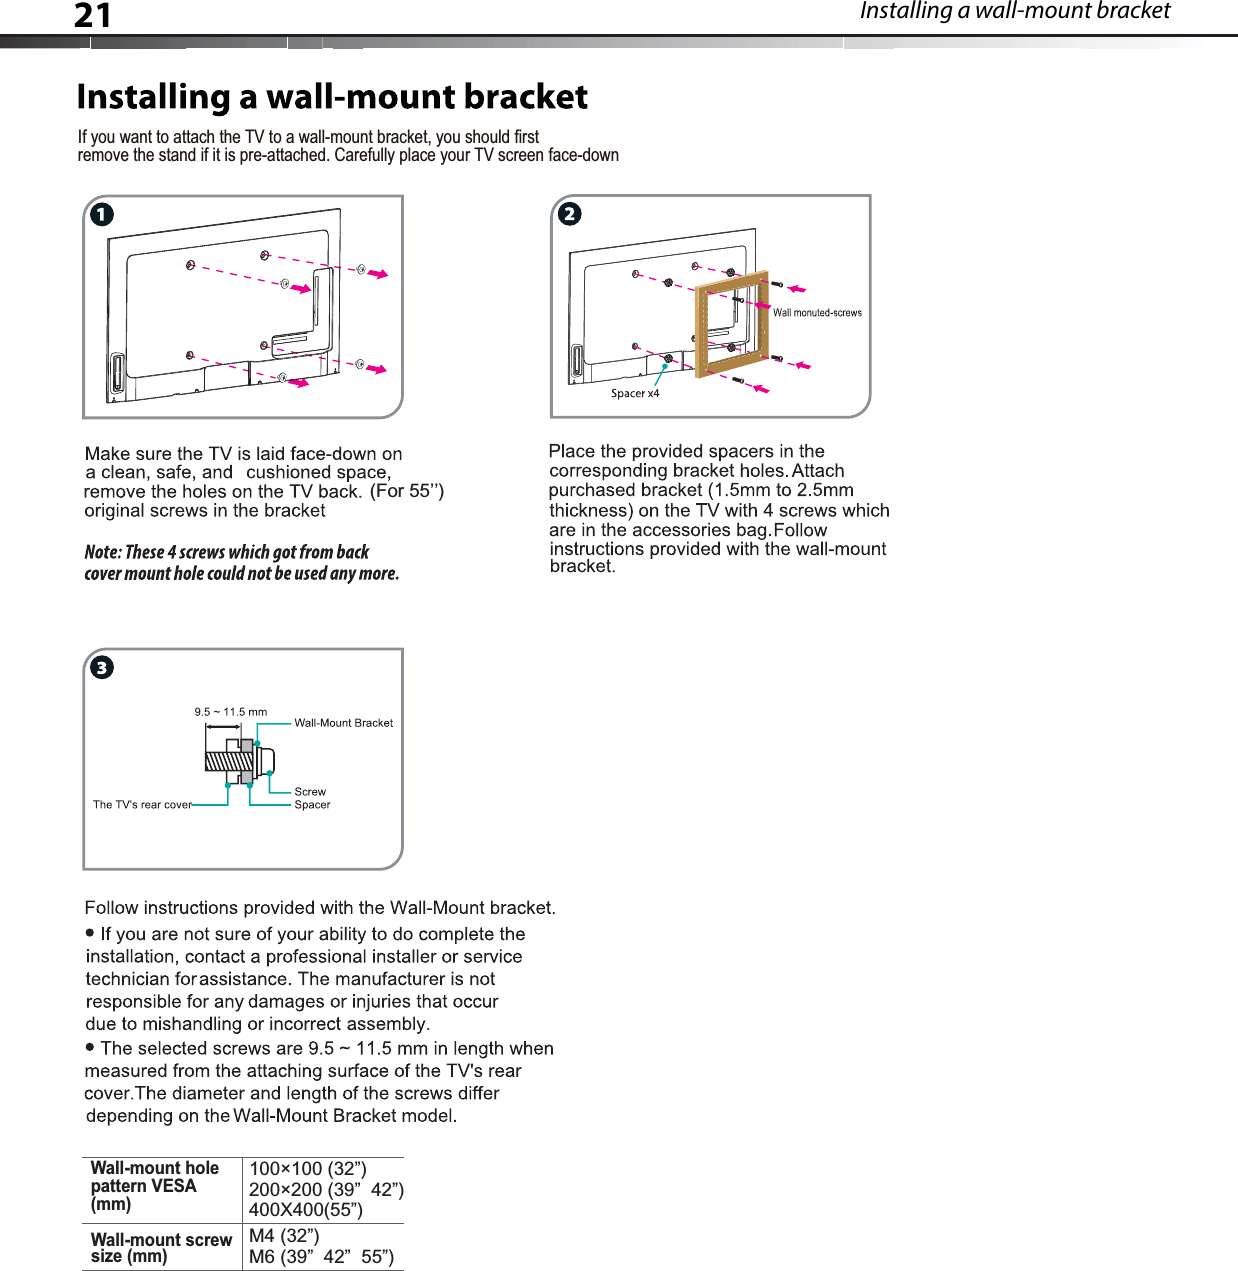 Installing a wall-mount bracket21If you want to attach the TV to a wall-mount bracket, you should first remove the stand if it is pre-attached. Carefully place your TV screen face-down (For 55’’)Wall-mount holepattern VESA(mm)100×100 (32”)200×200 (39”  42”) Wall-mount screw size (mm)M4 (32”)M6 (39”  42”  55”) 400X400(55”)